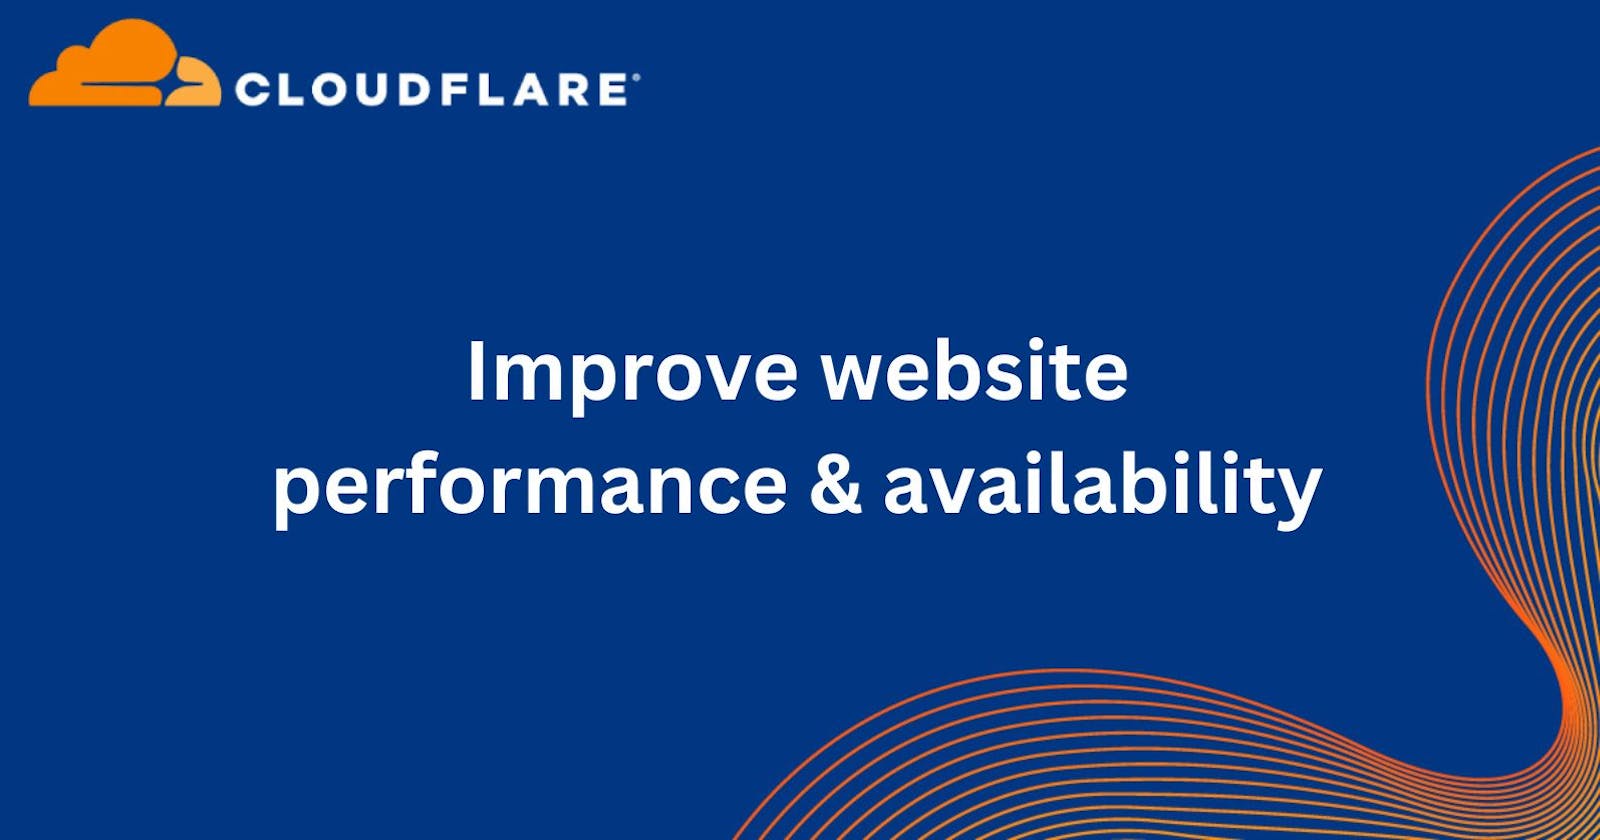 Improve website performance & availability with Cloudflare (low effort)